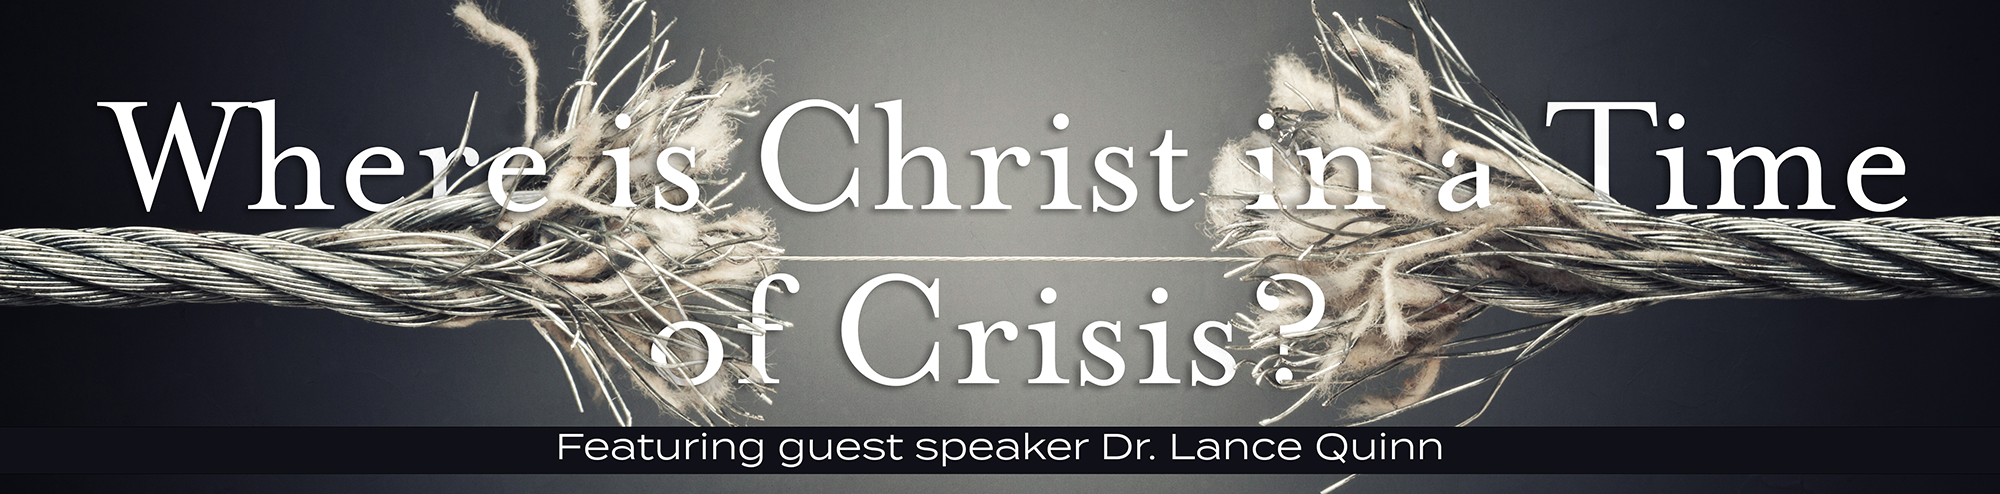 28th Annual Bible Conference featuring Dr. Lance Quinn